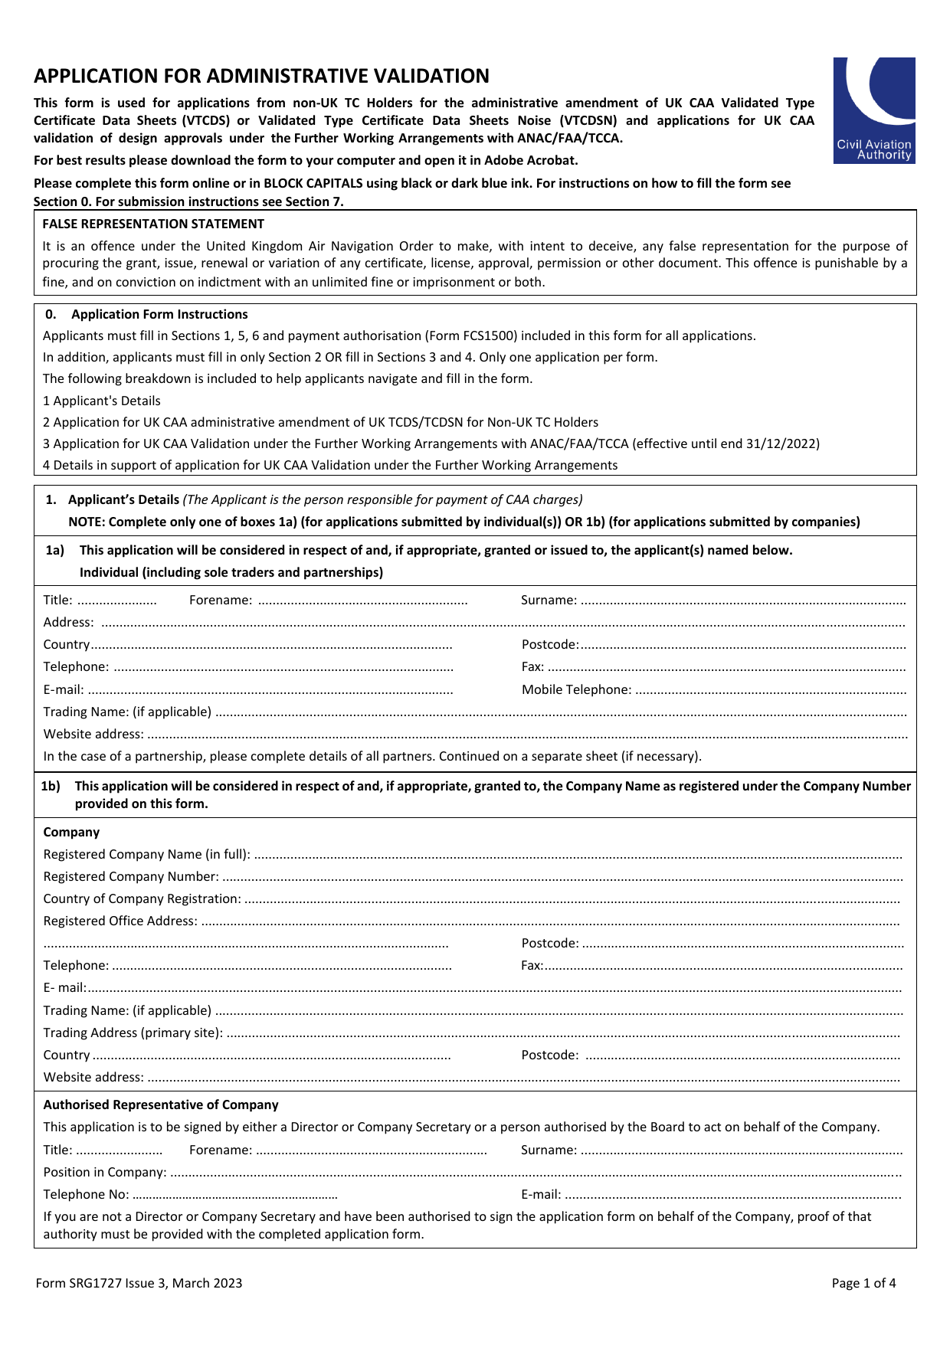 Form SRG1727 Application for Administrative Validation - United Kingdom, Page 1